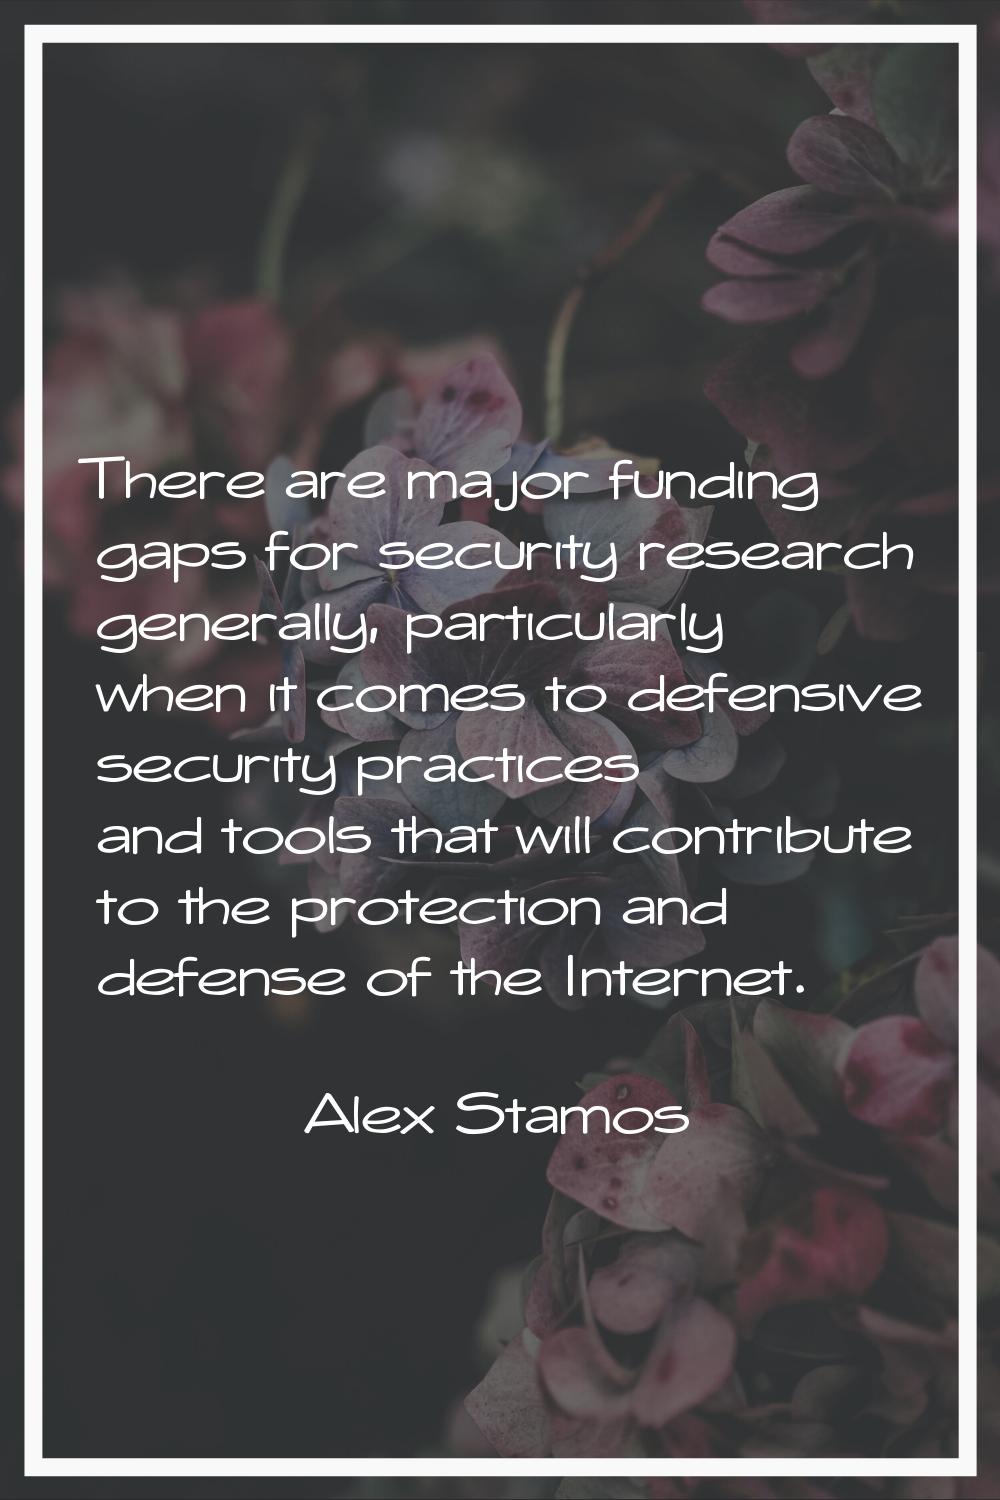 There are major funding gaps for security research generally, particularly when it comes to defensi